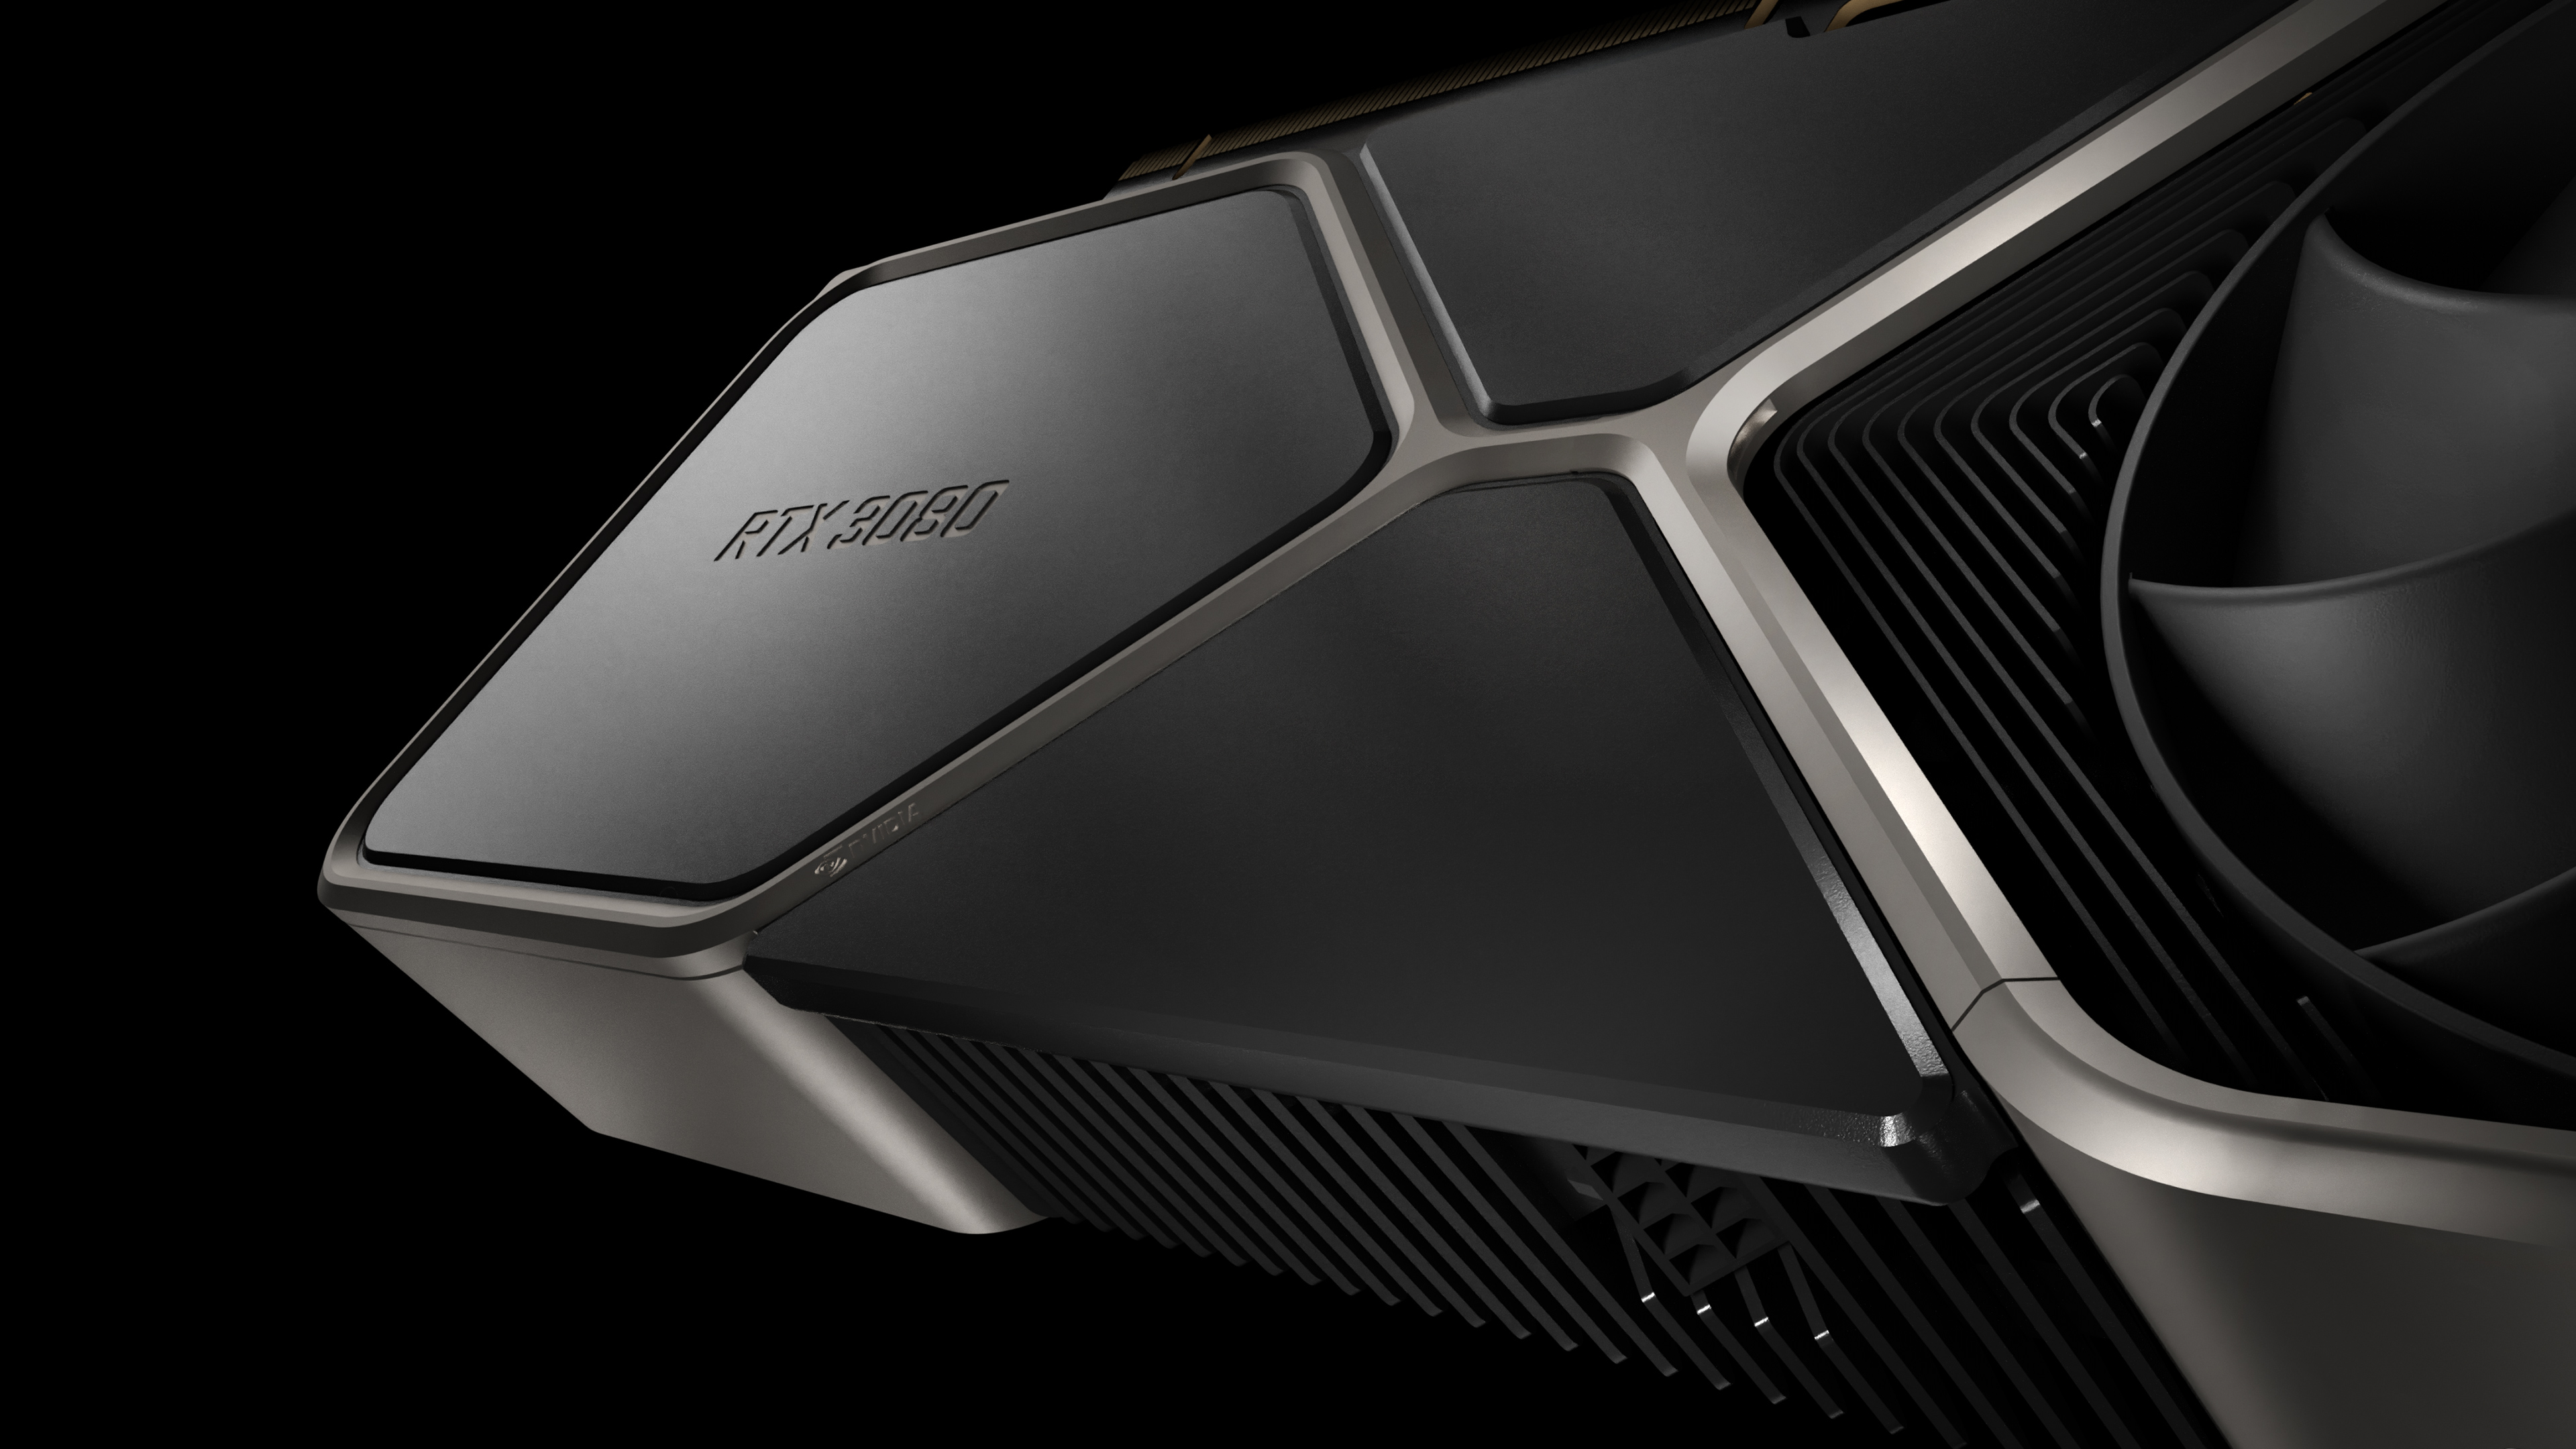 Nvidia RTX 30-series graphics cards